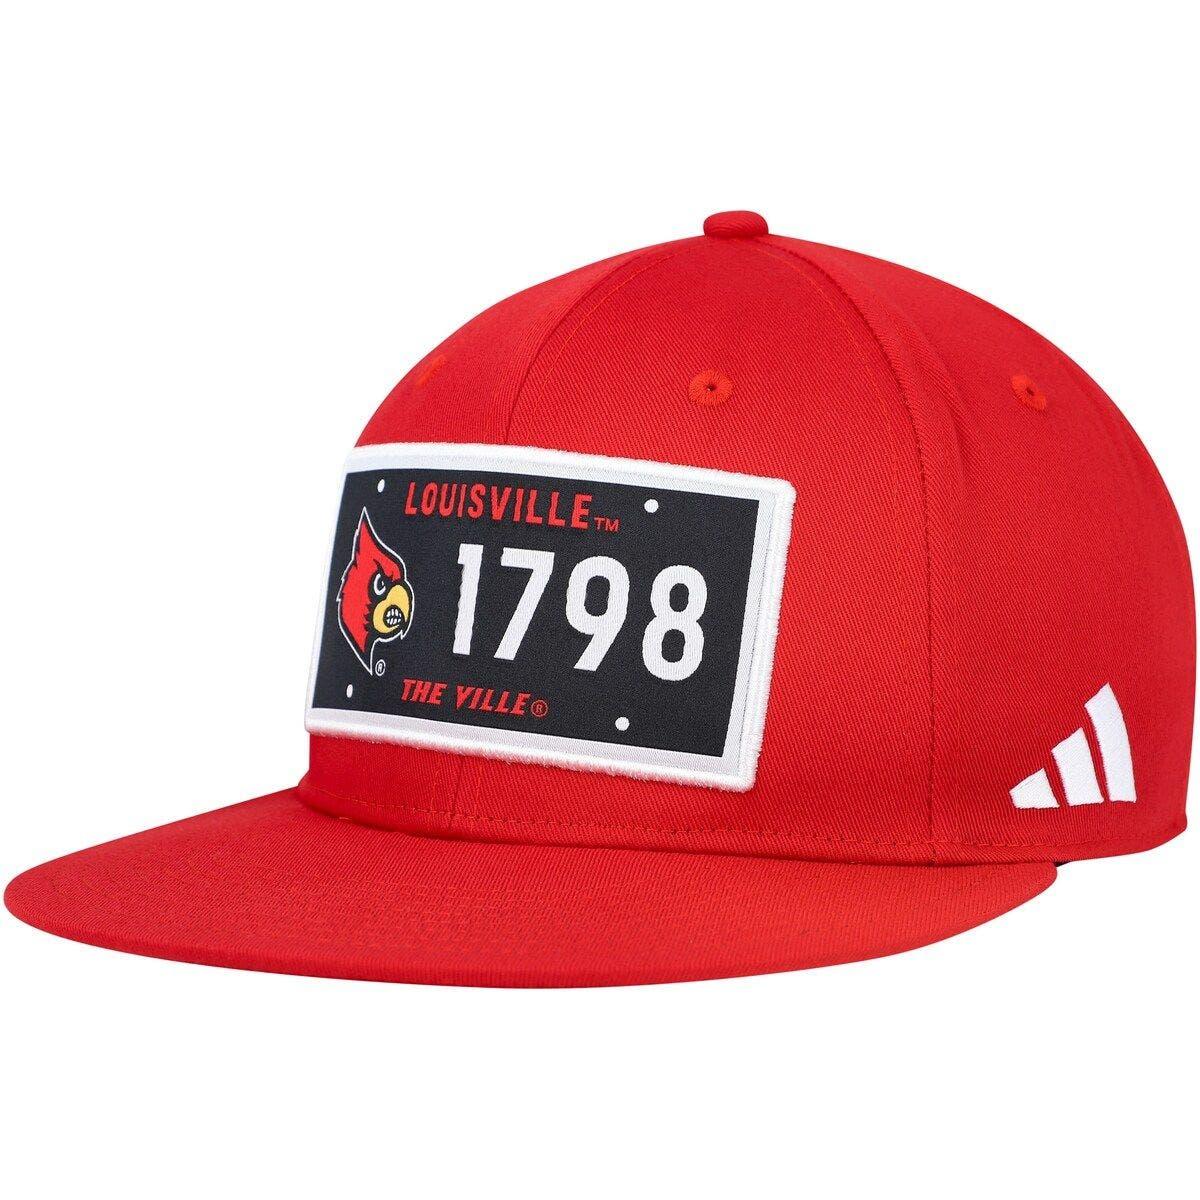 Men's Adidas White Louisville Cardinals On-Field Baseball Fitted Hat